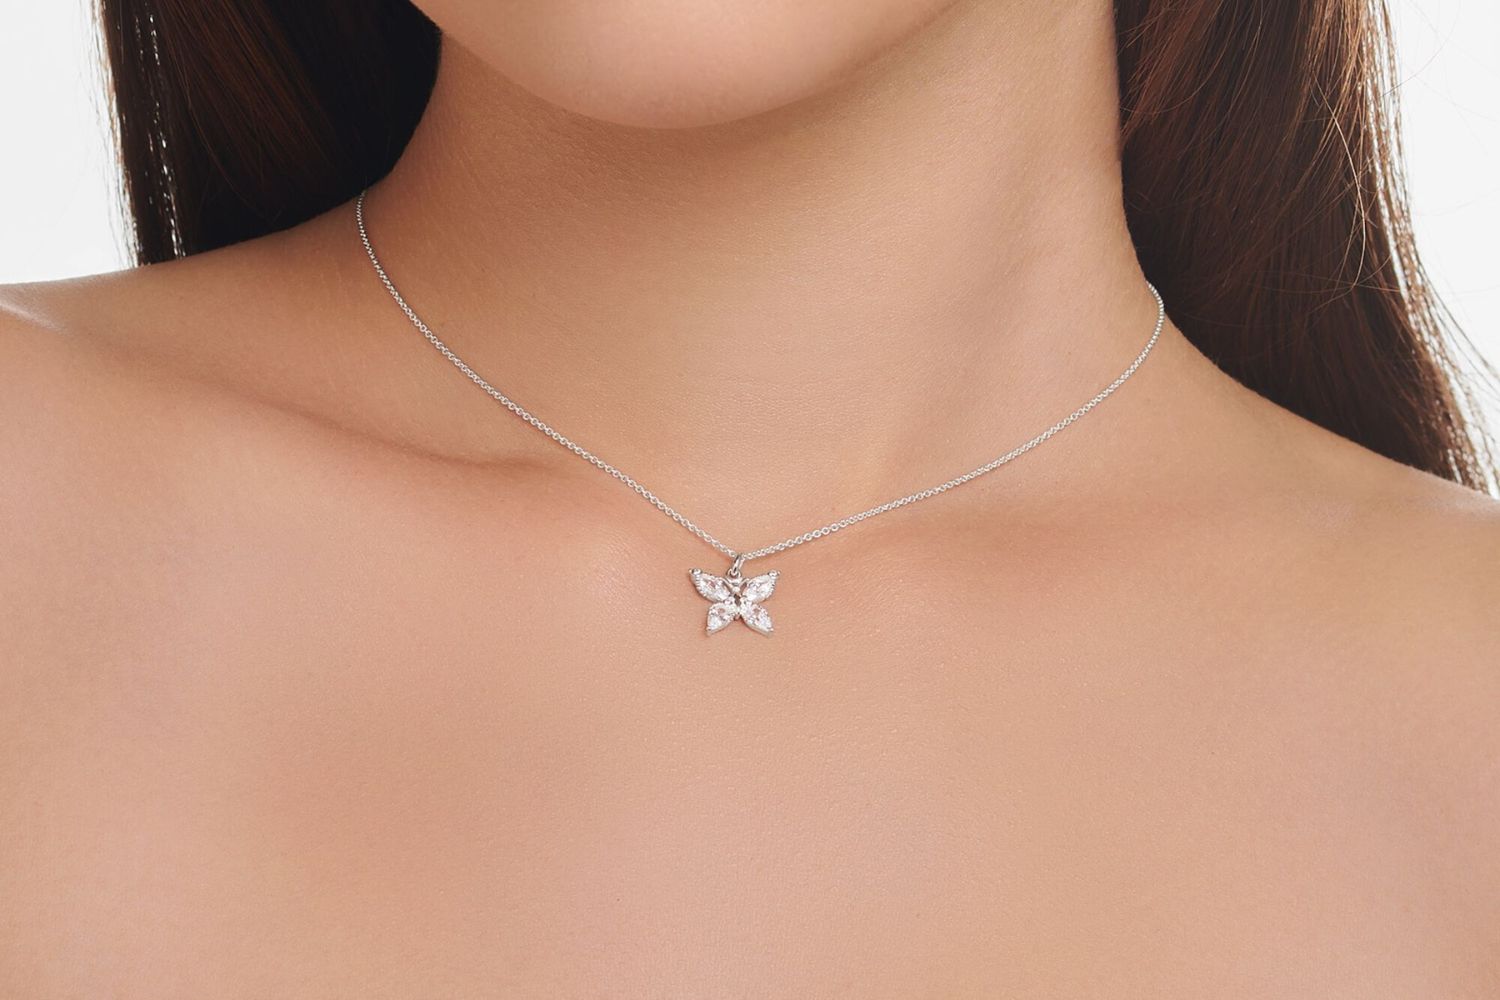 Star of David Necklace Personalized Name Necklace Silver Jewish Star  Necklace Butterfly Necklace Gift Cross Pendant Hand of God Pendant